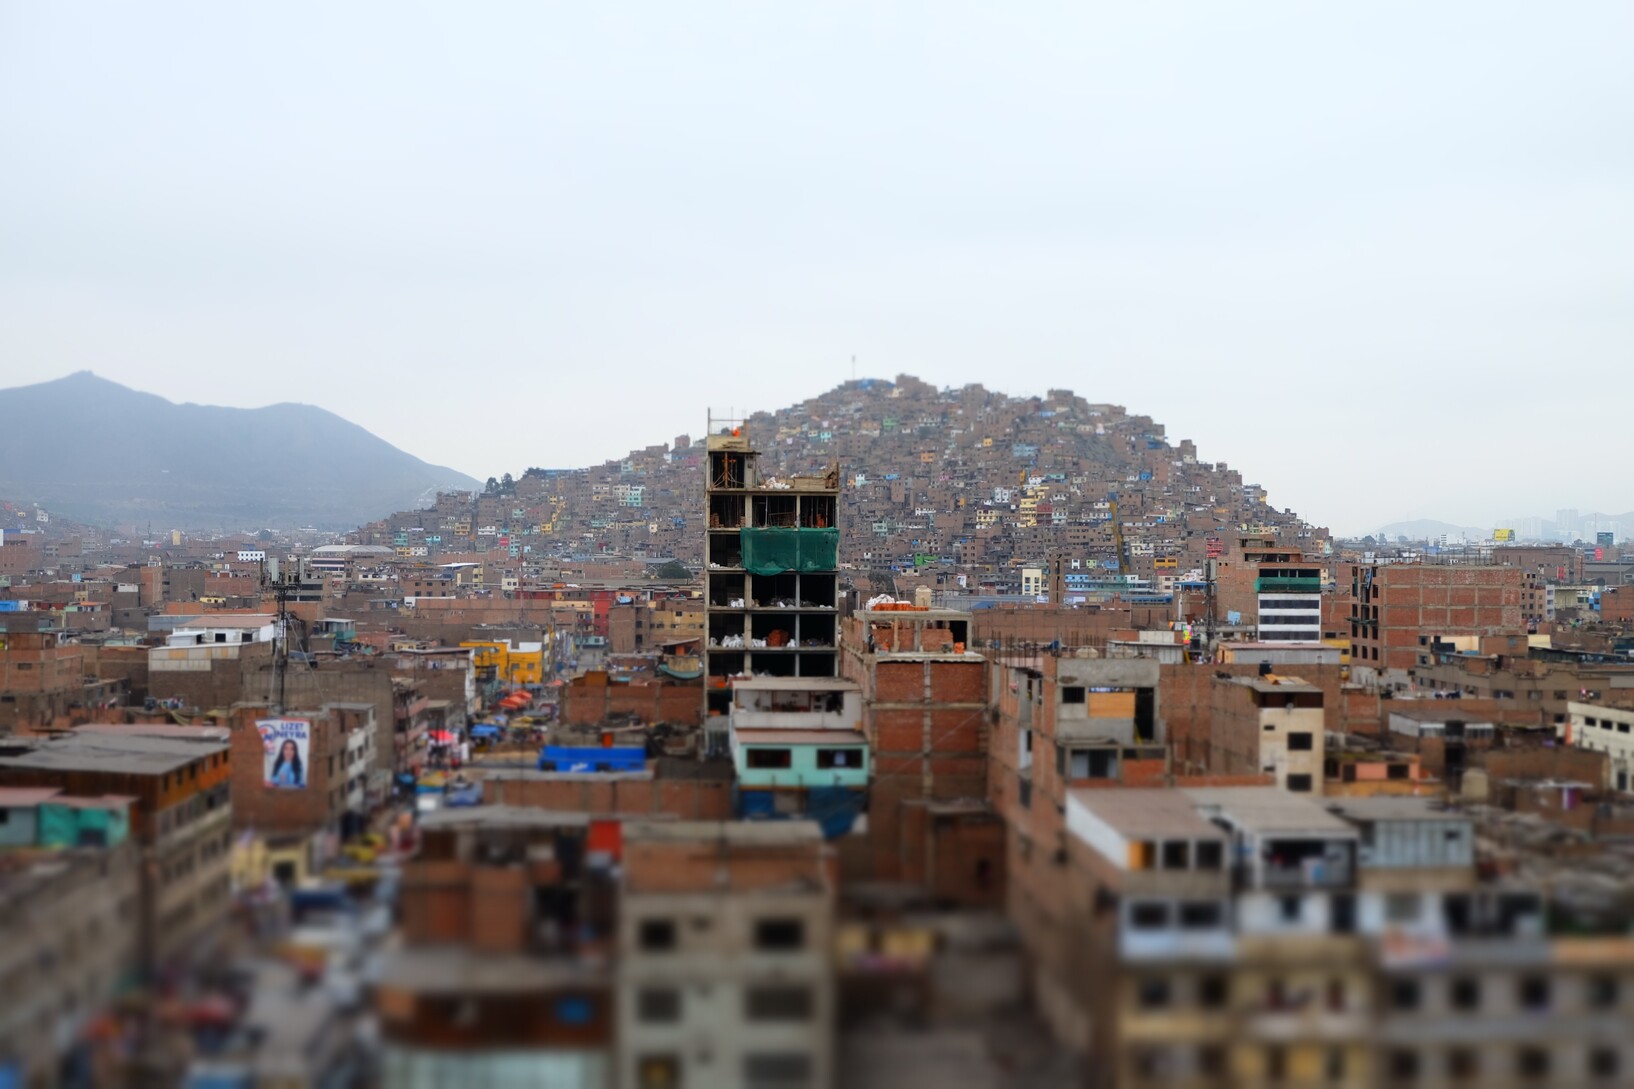 The image is focused on an unfinished high-rise building. A densely built-up hill can be seen in the background. 